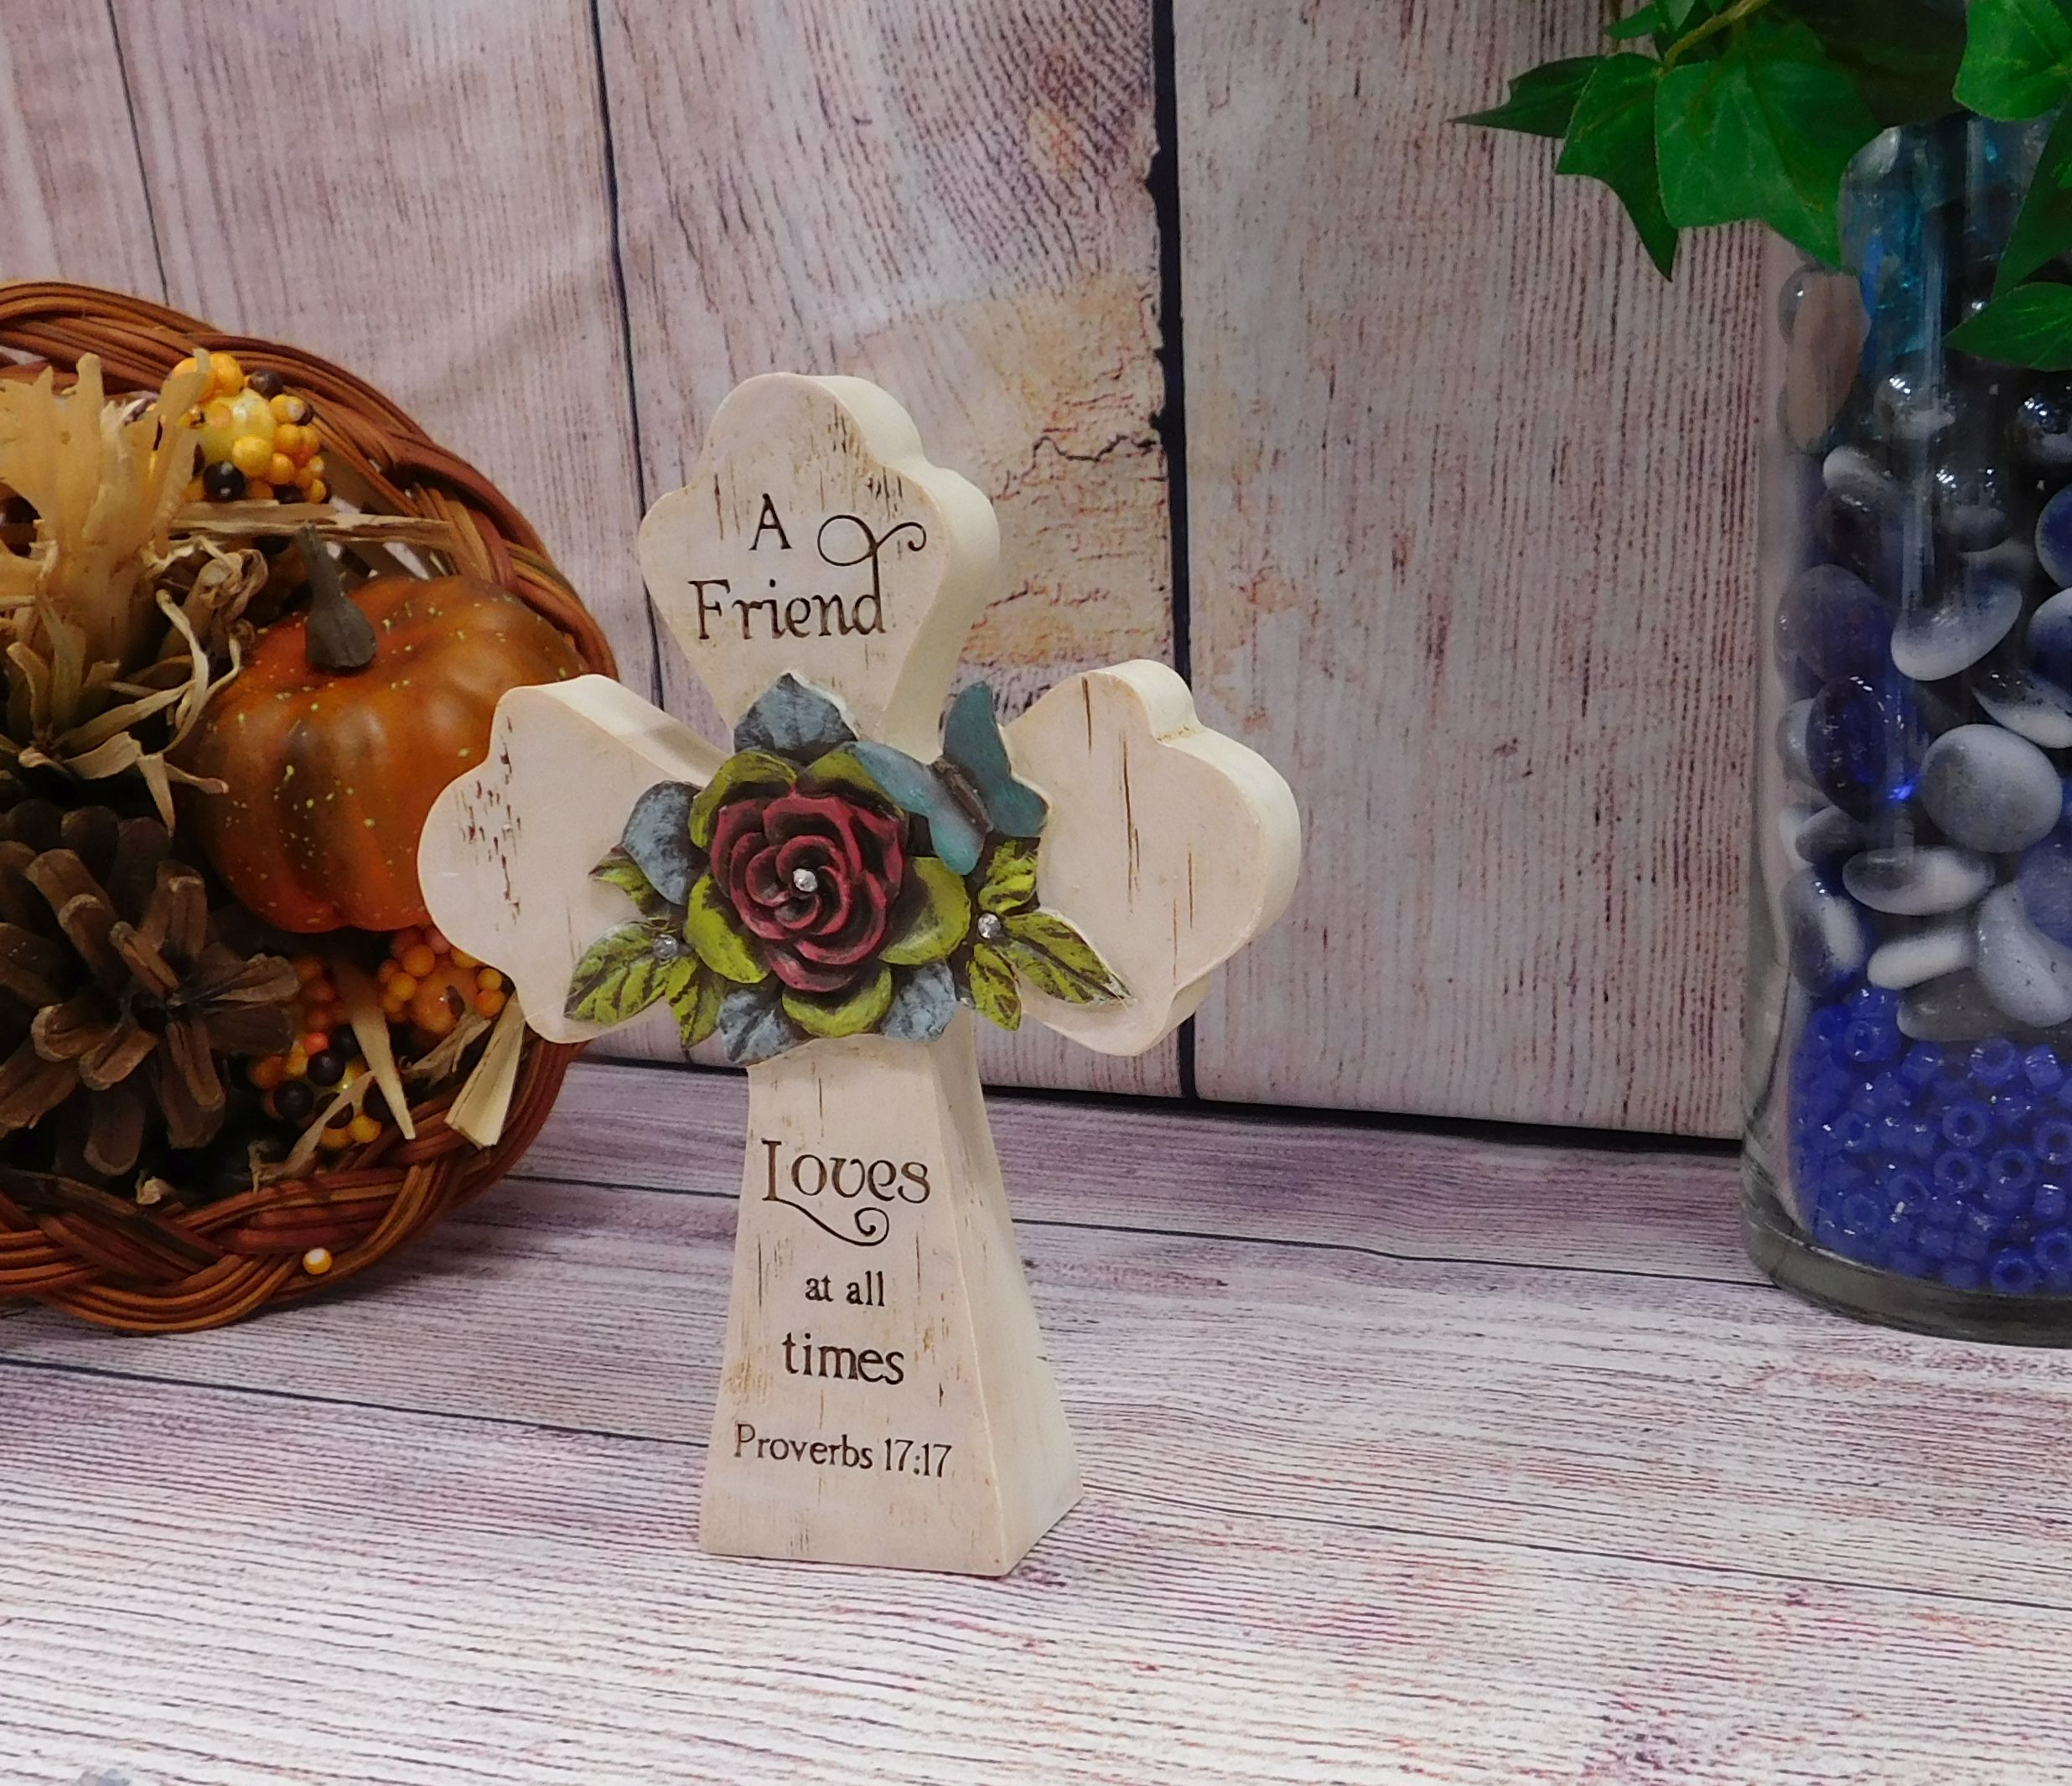 "A Friend..." Proverb Porcelain Cross - Approx 6 inches tall